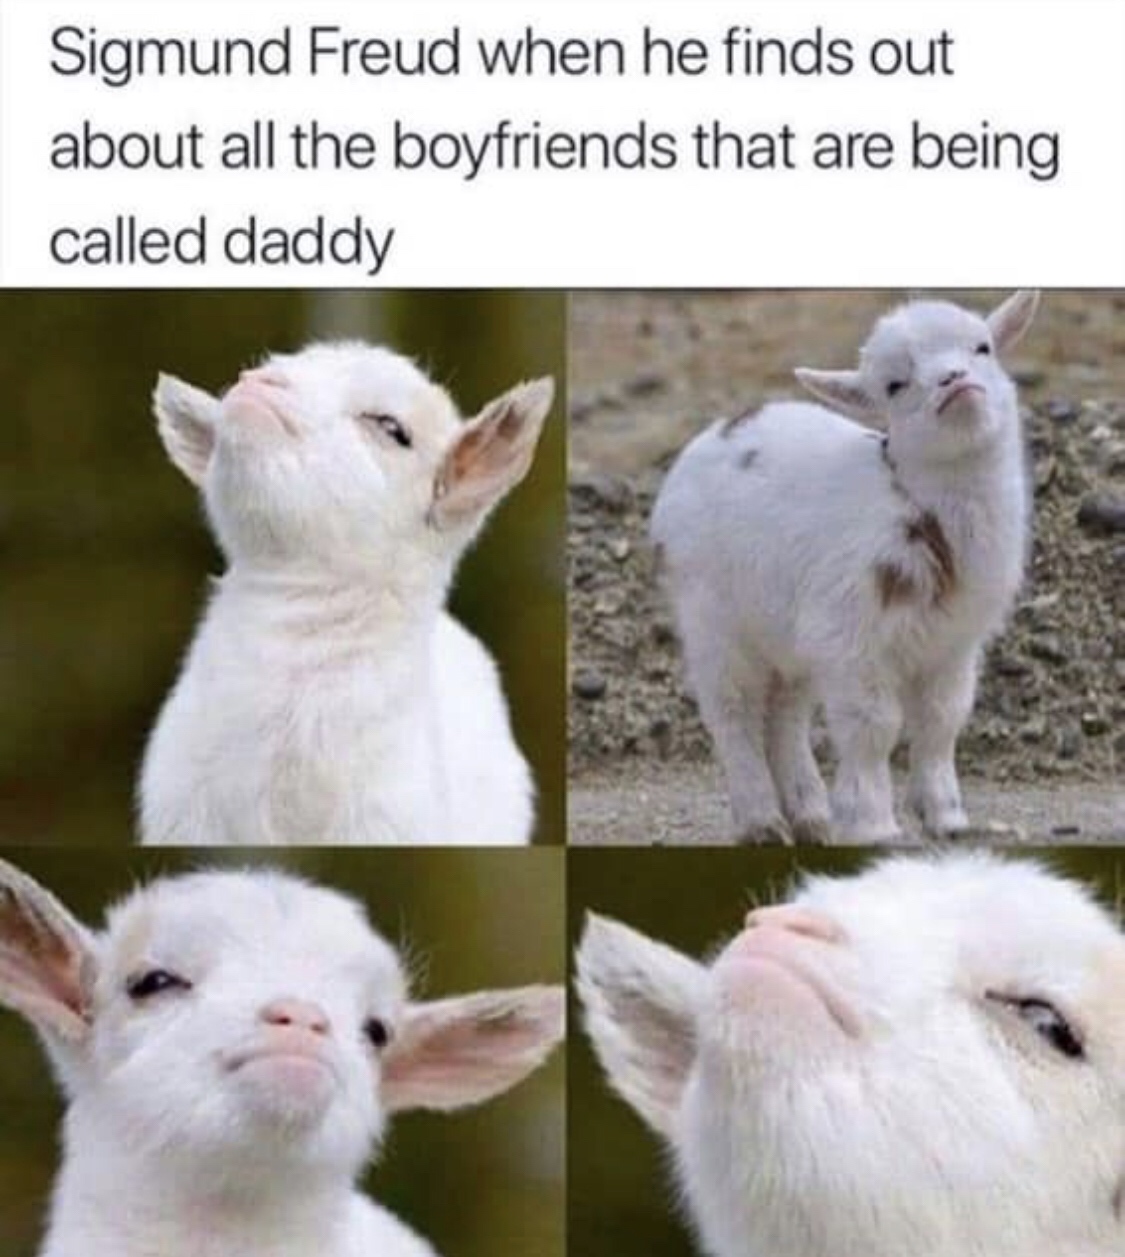 lamb meme - Sigmund Freud when he finds out about all the boyfriends that are being called daddy